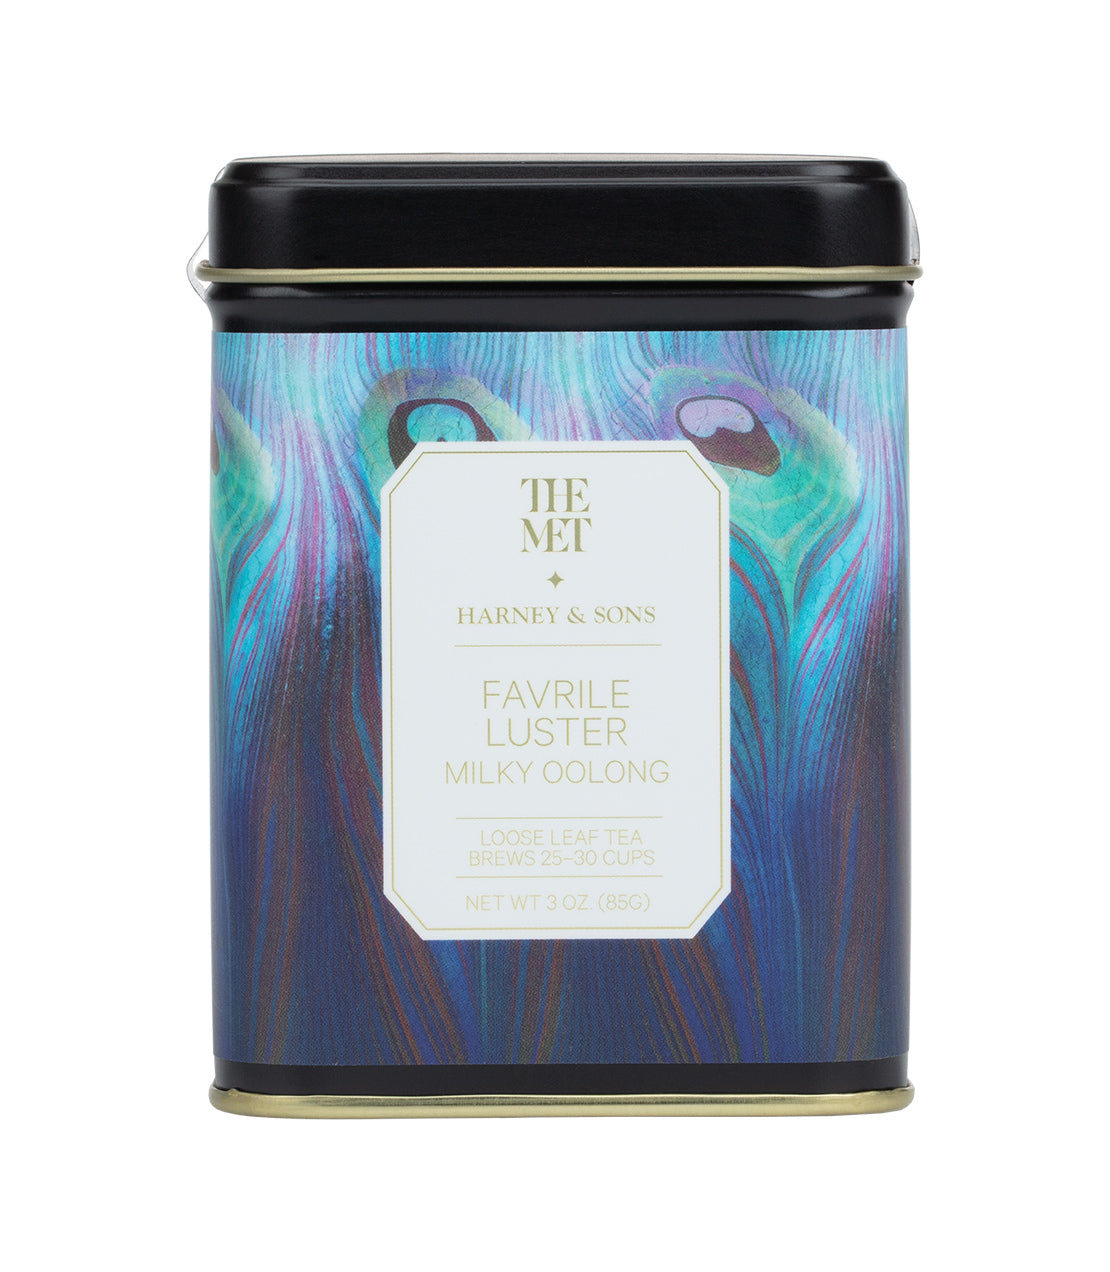 The Met - Favrile Luster - Loose 3 oz. Tin - Harney & Sons Fine Teas